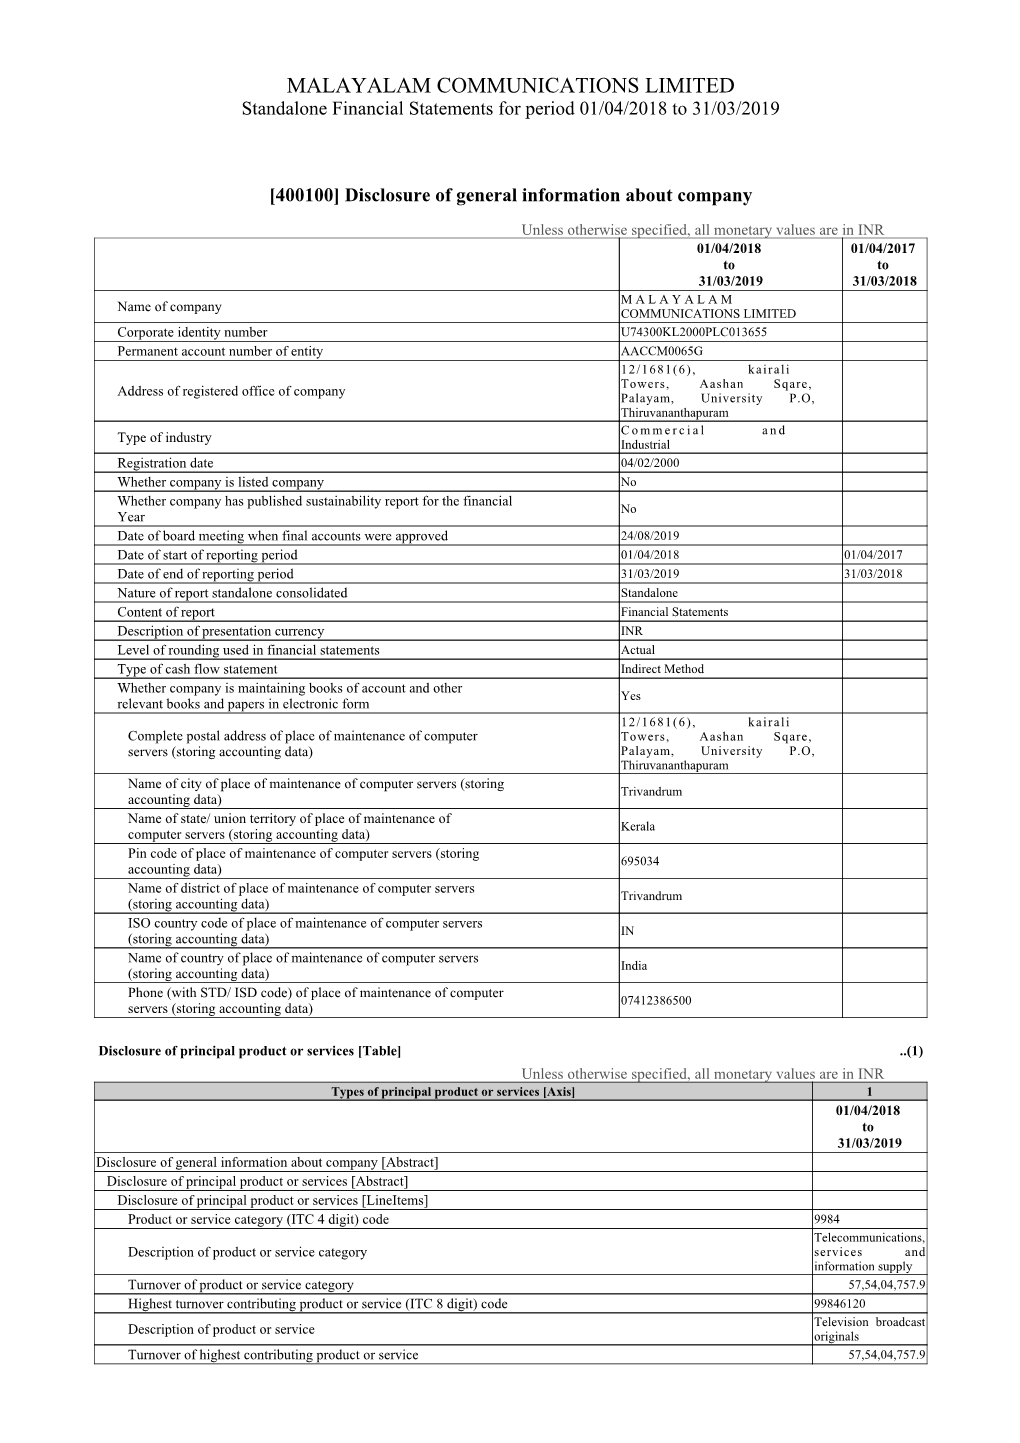 MALAYALAM COMMUNICATIONS LIMITED Standalone Financial Statements for Period 01/04/2018 to 31/03/2019